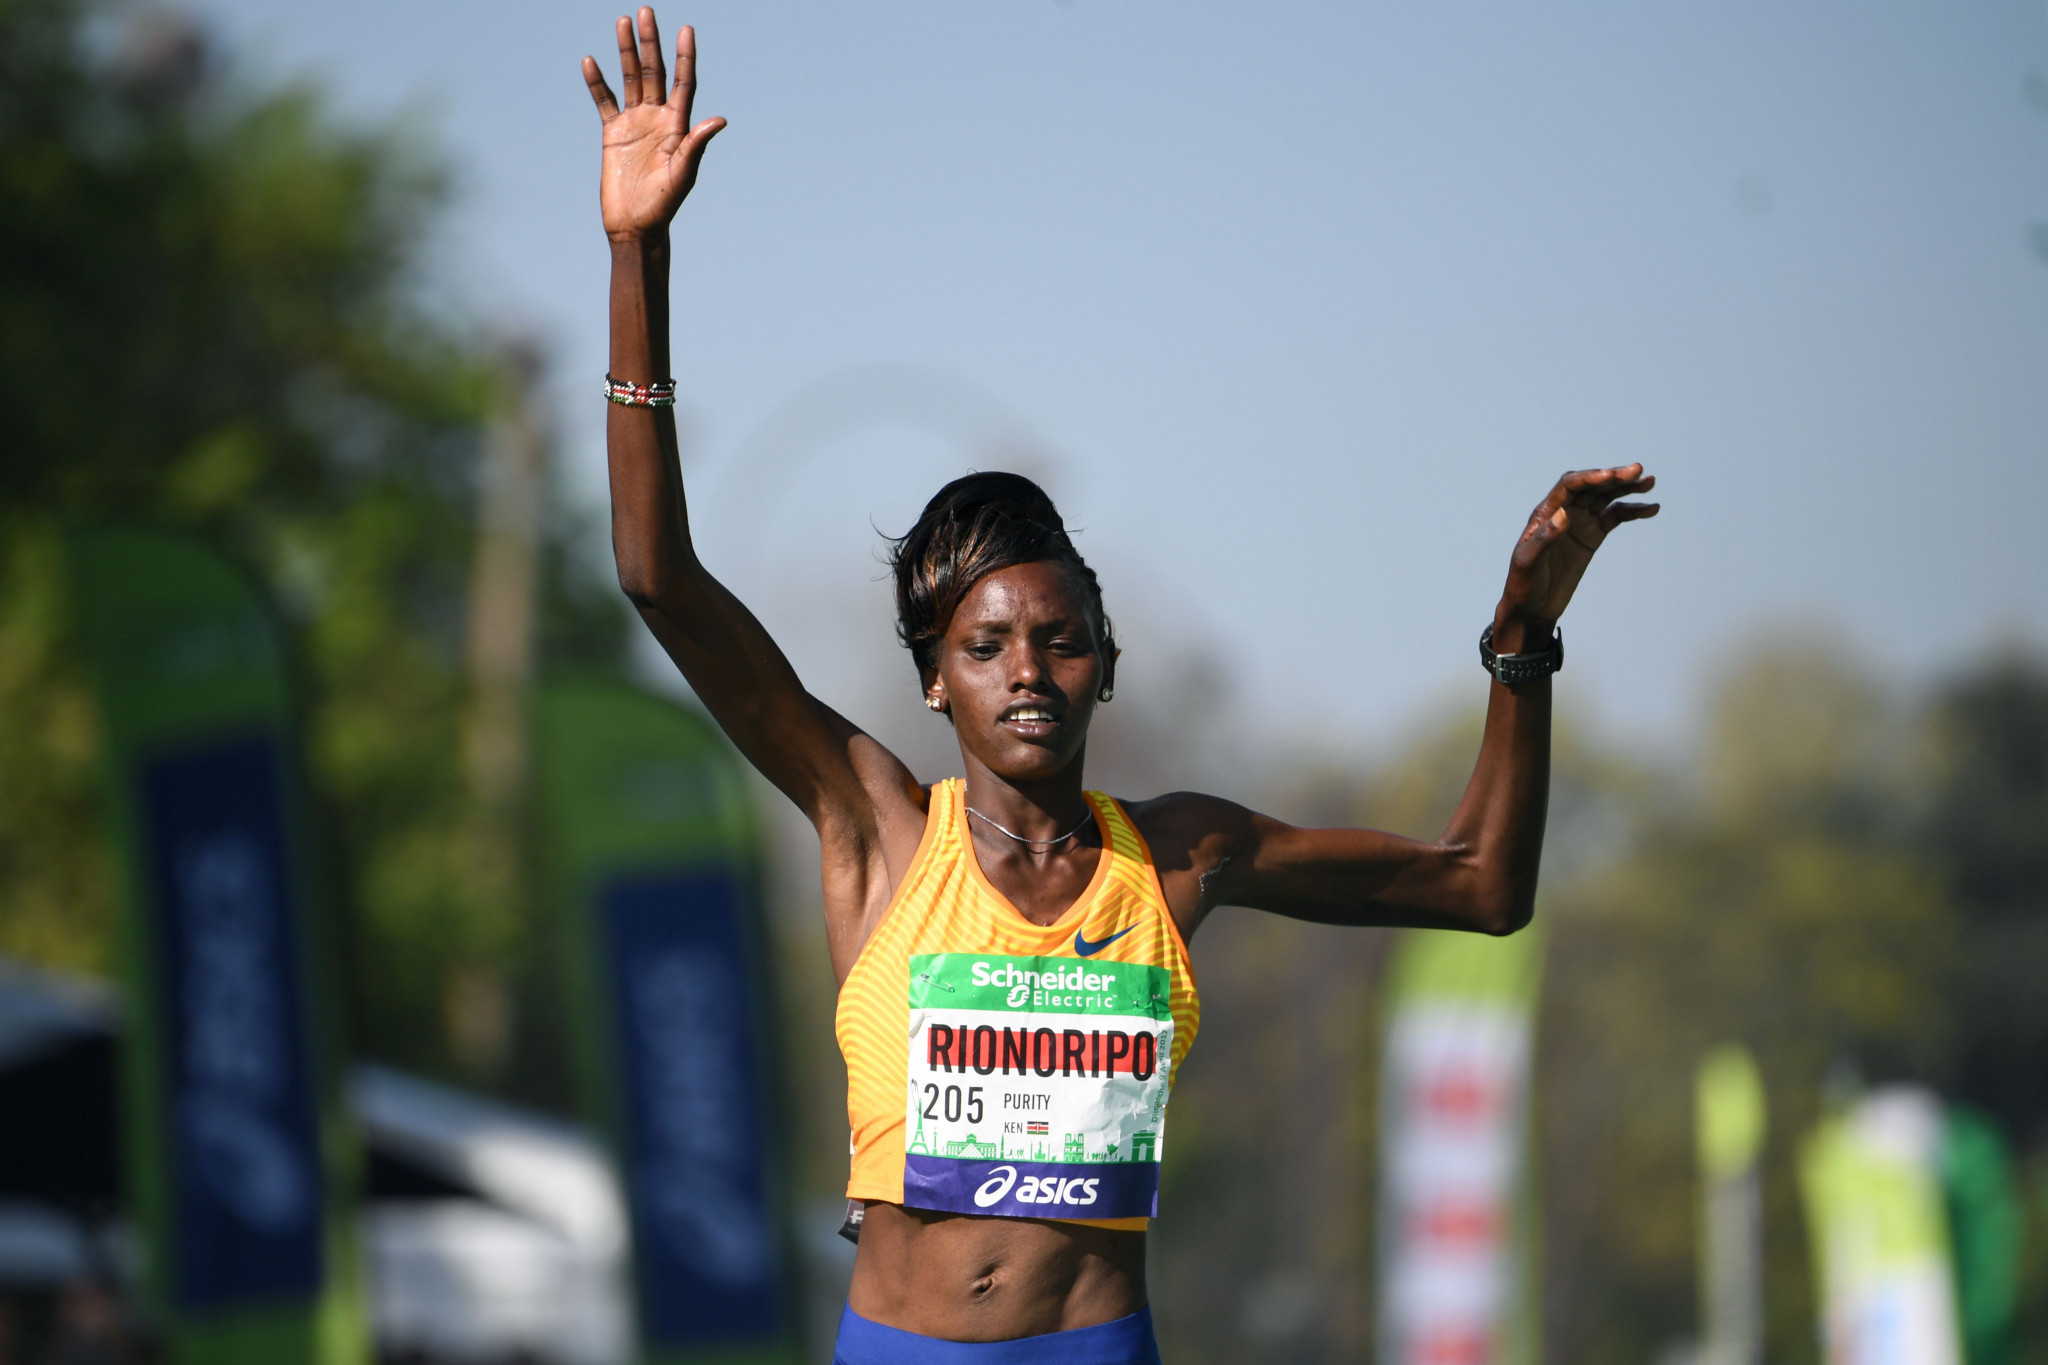 Purity Cherotich Rionoripo has been given a five-year ban too ©Getty Images